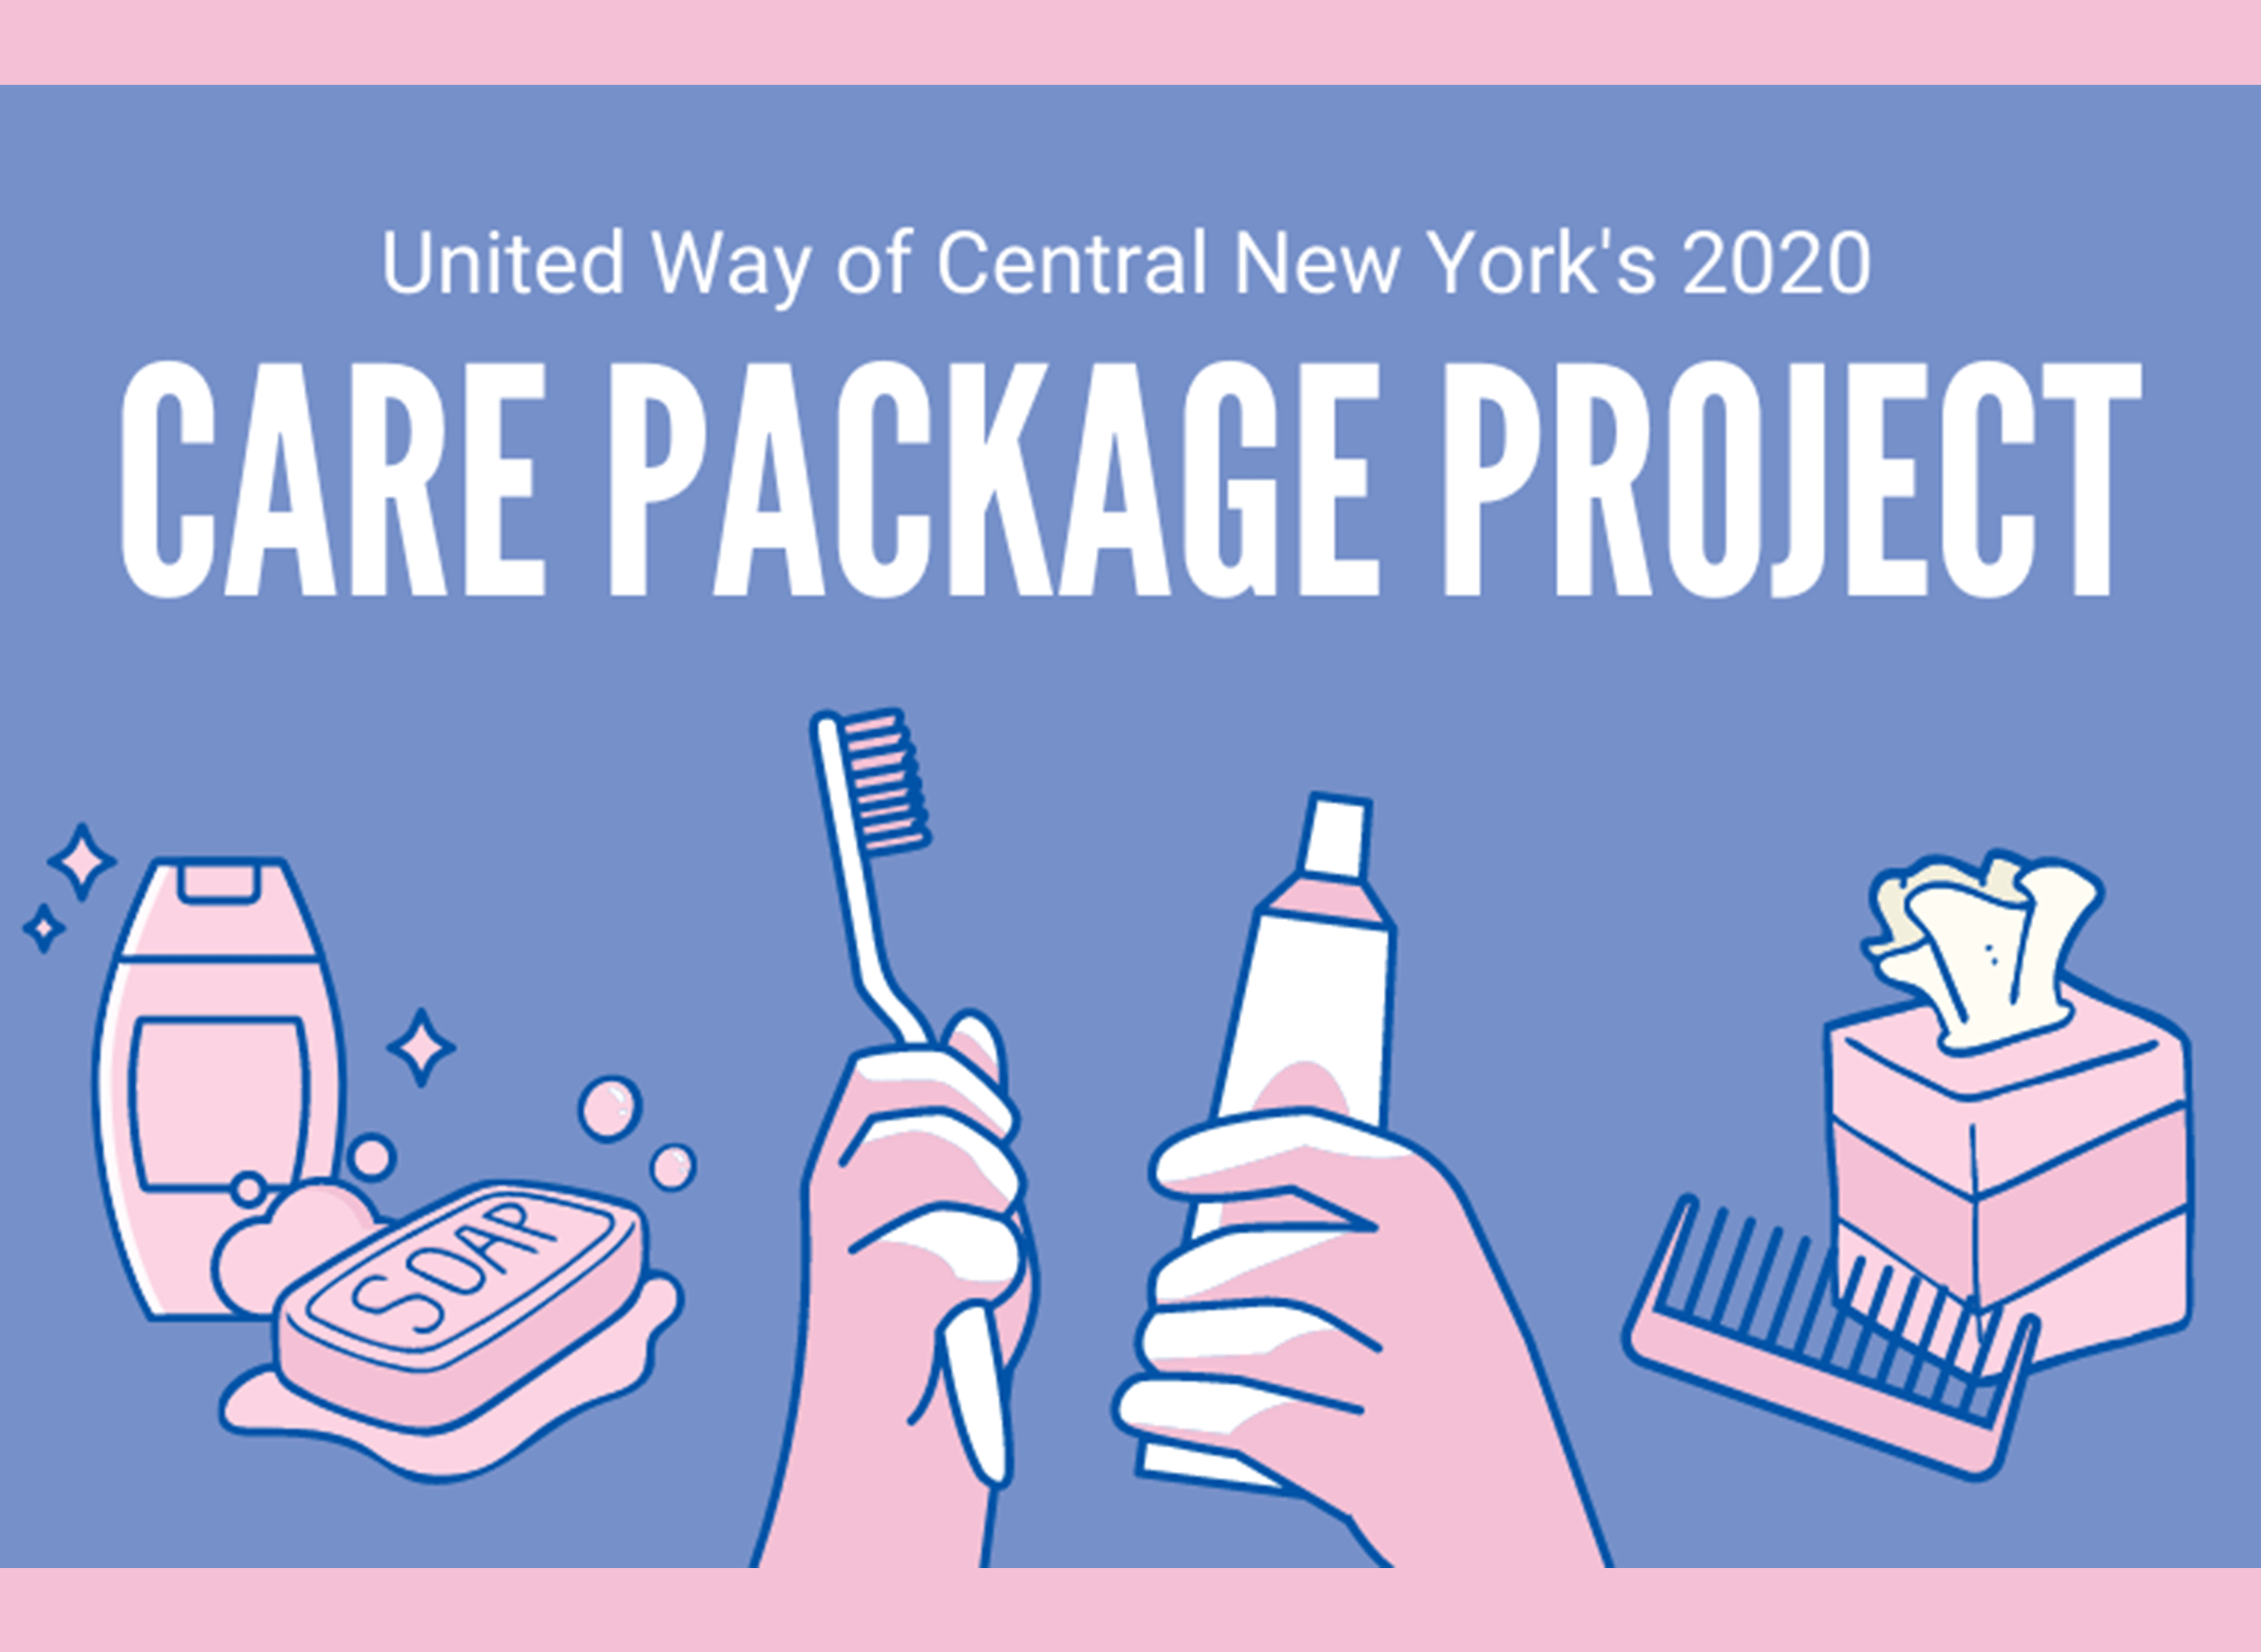 United Way of Central New York's 2020 Care Package Project